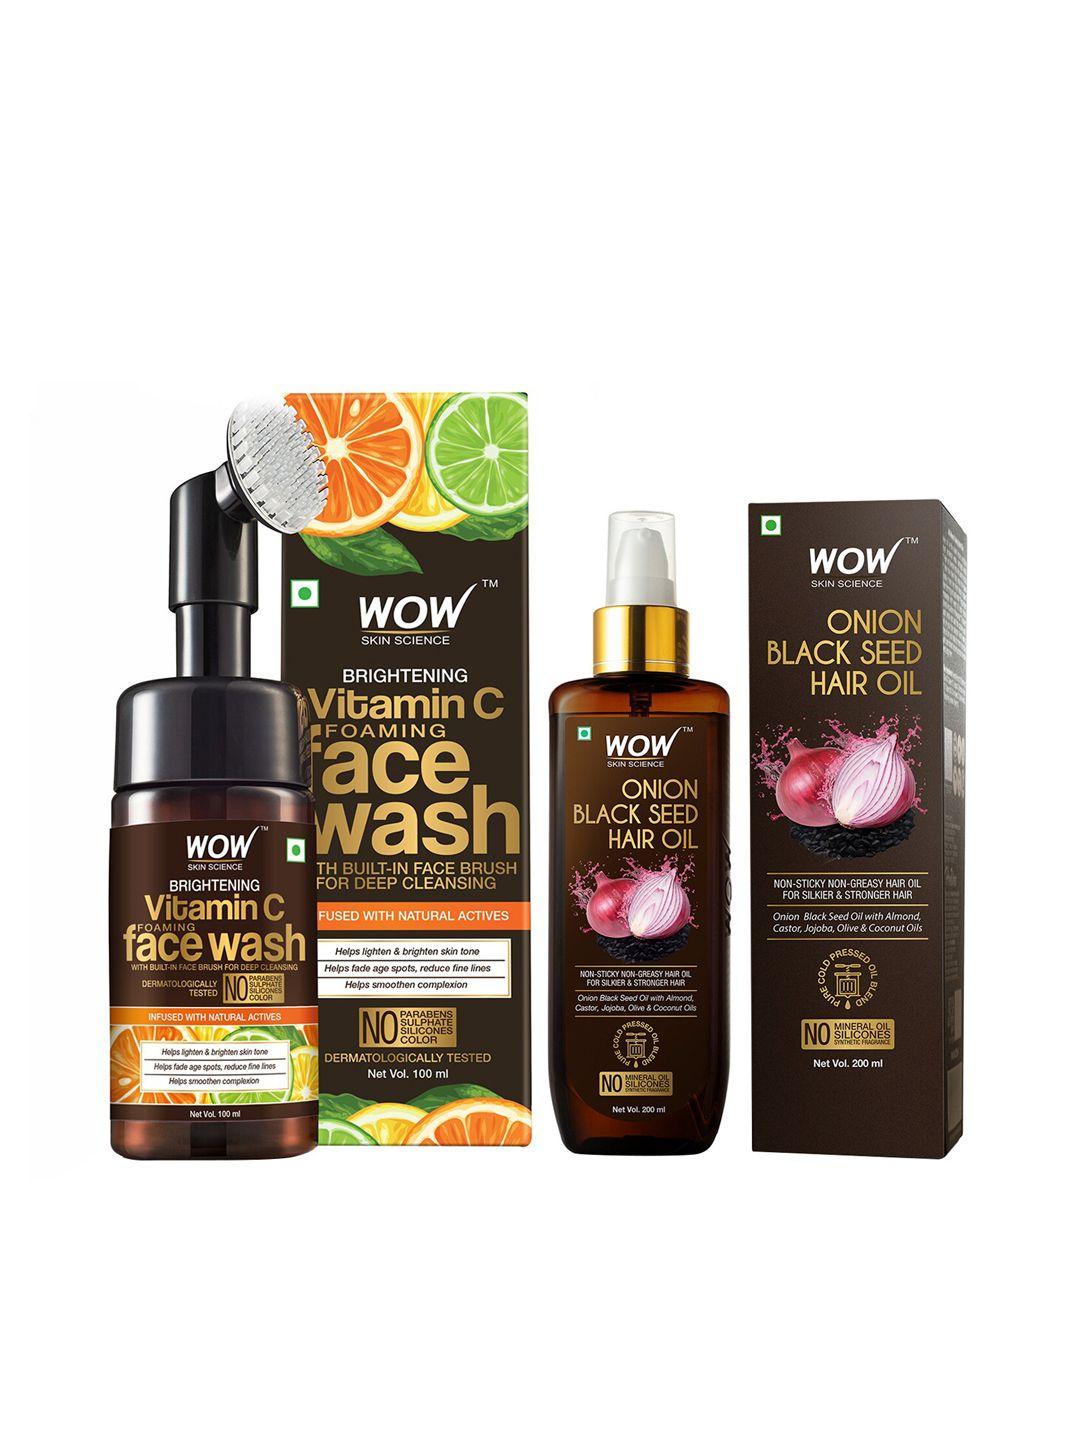 wow-skin-science-set-of-onion-black-seed-hair-oil-&-brightening-vitamin-c-face-wash